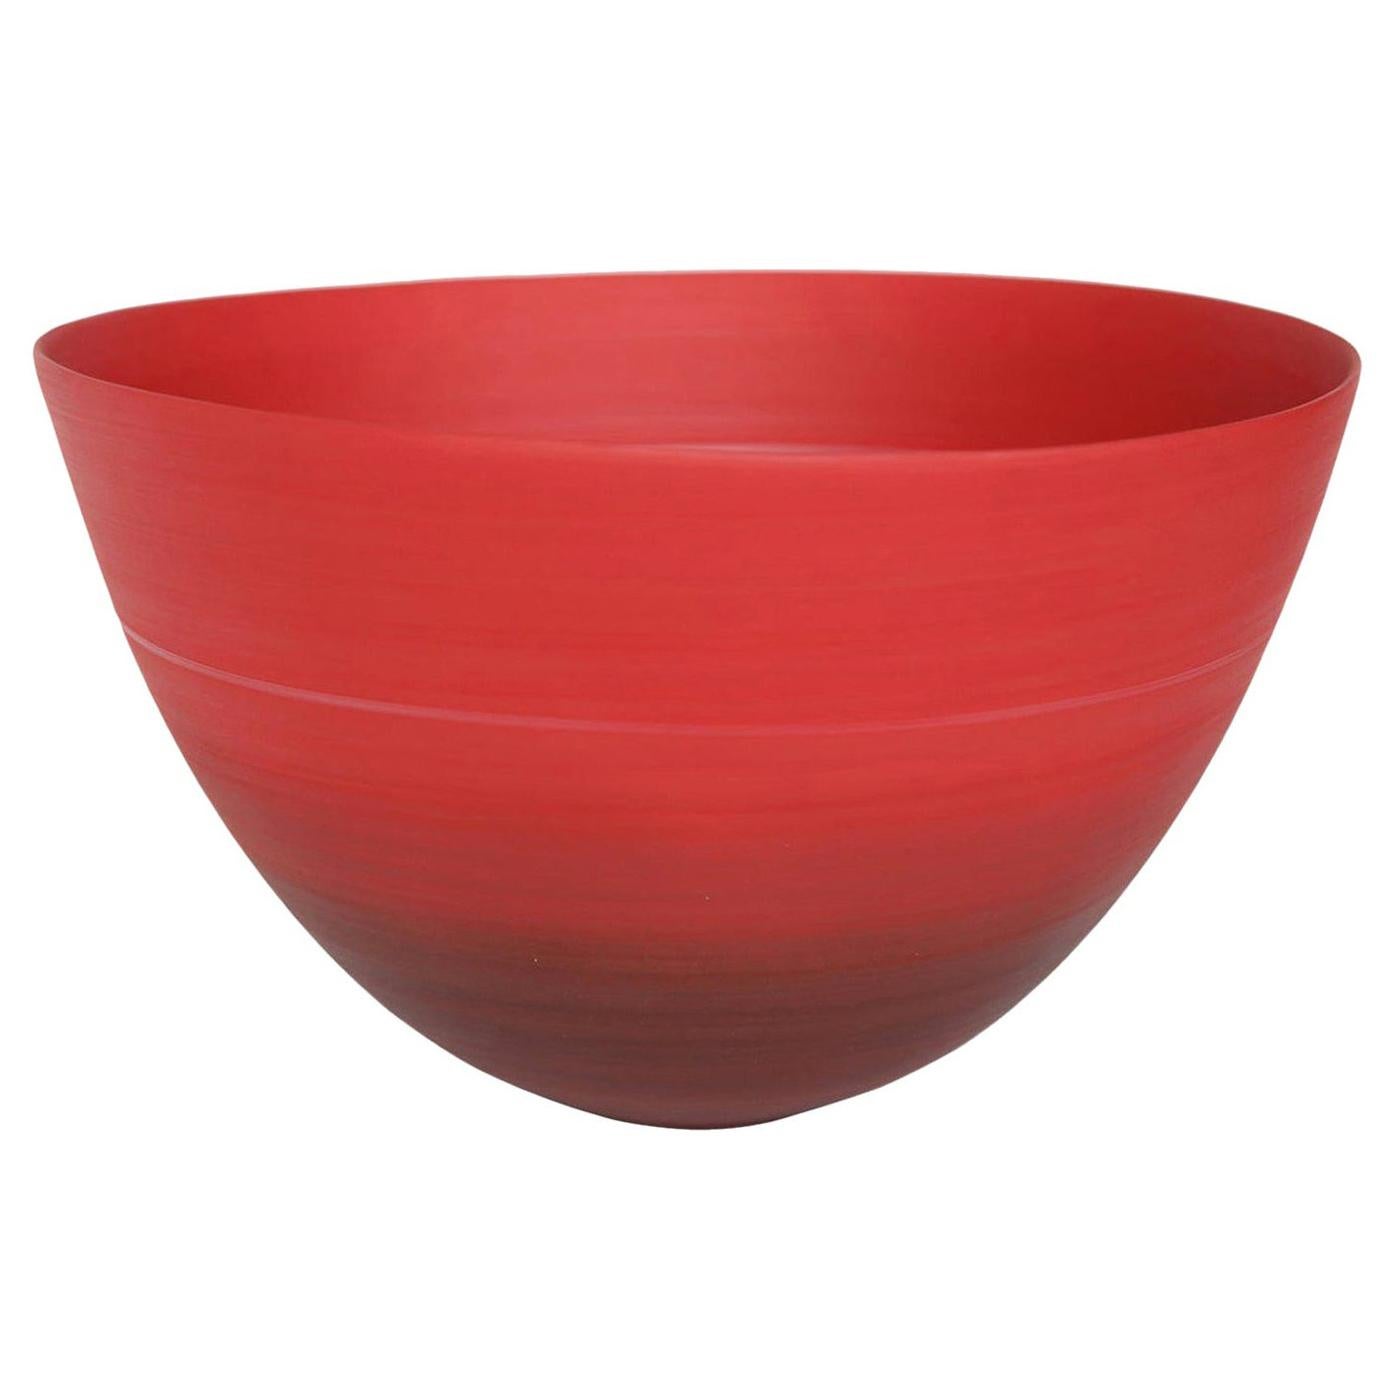 Rina Menardi Handmade Ceramic Bowls in Red, Green and Blue For Sale